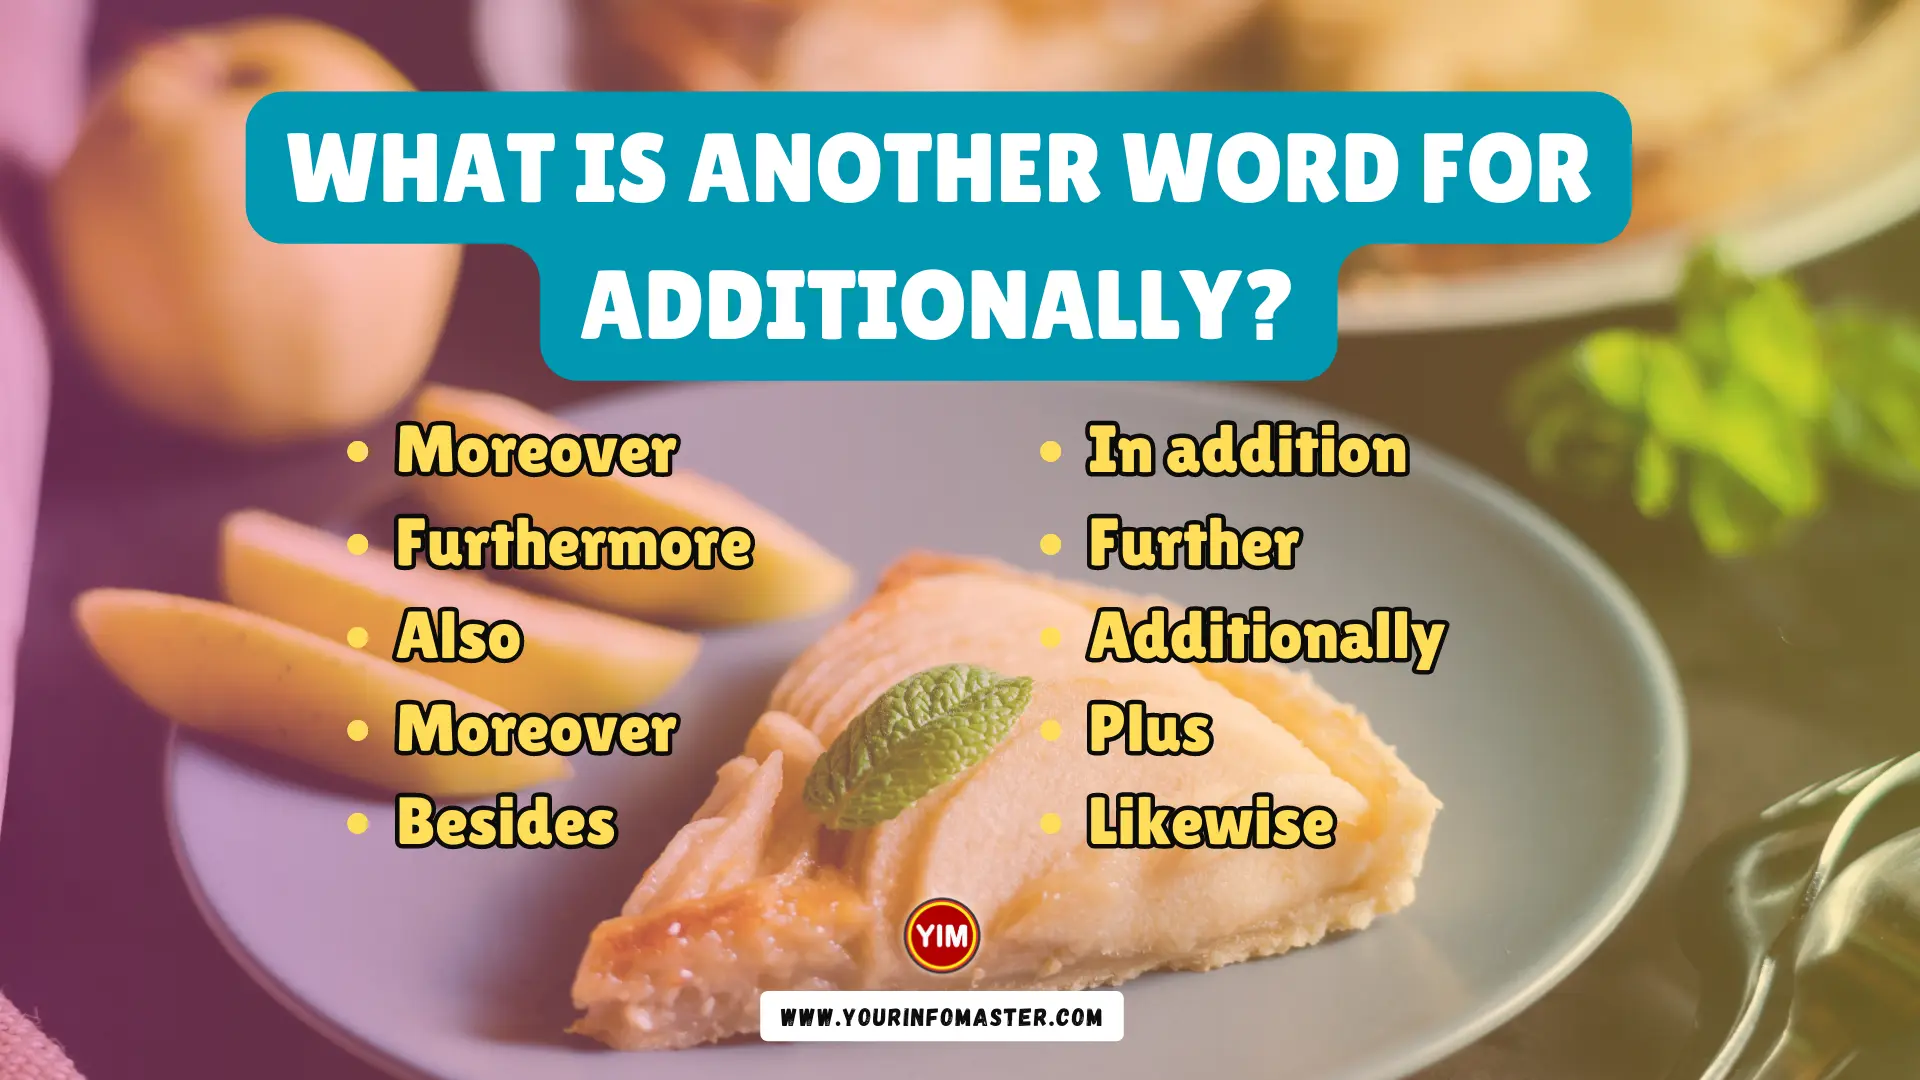 What is another word for Additionally